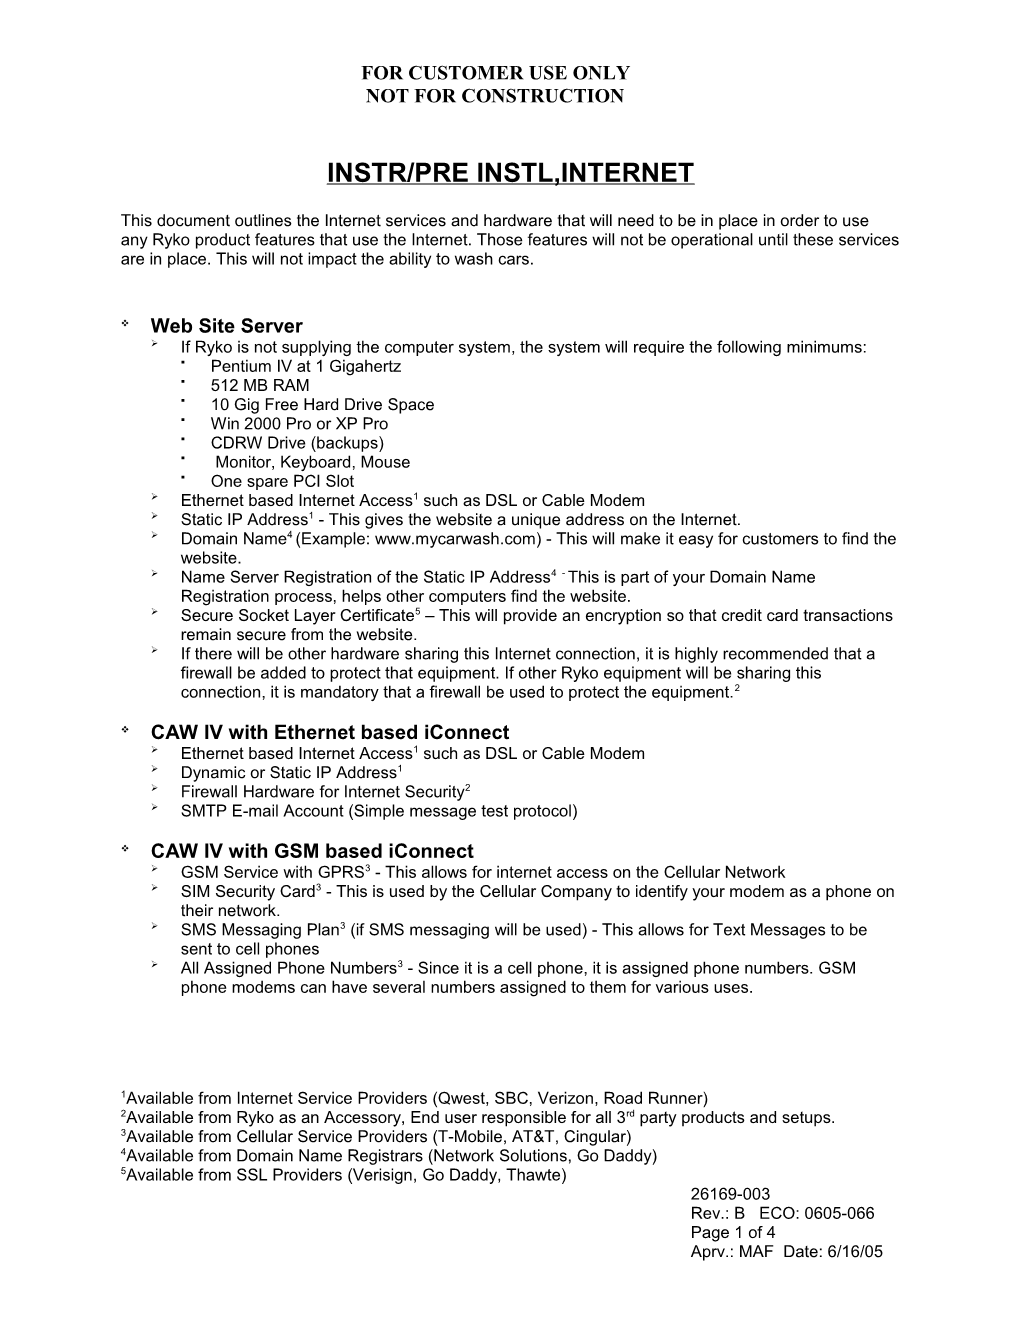 This Document Outlines the Internet Services and Hardware That Will Need to Be in Place